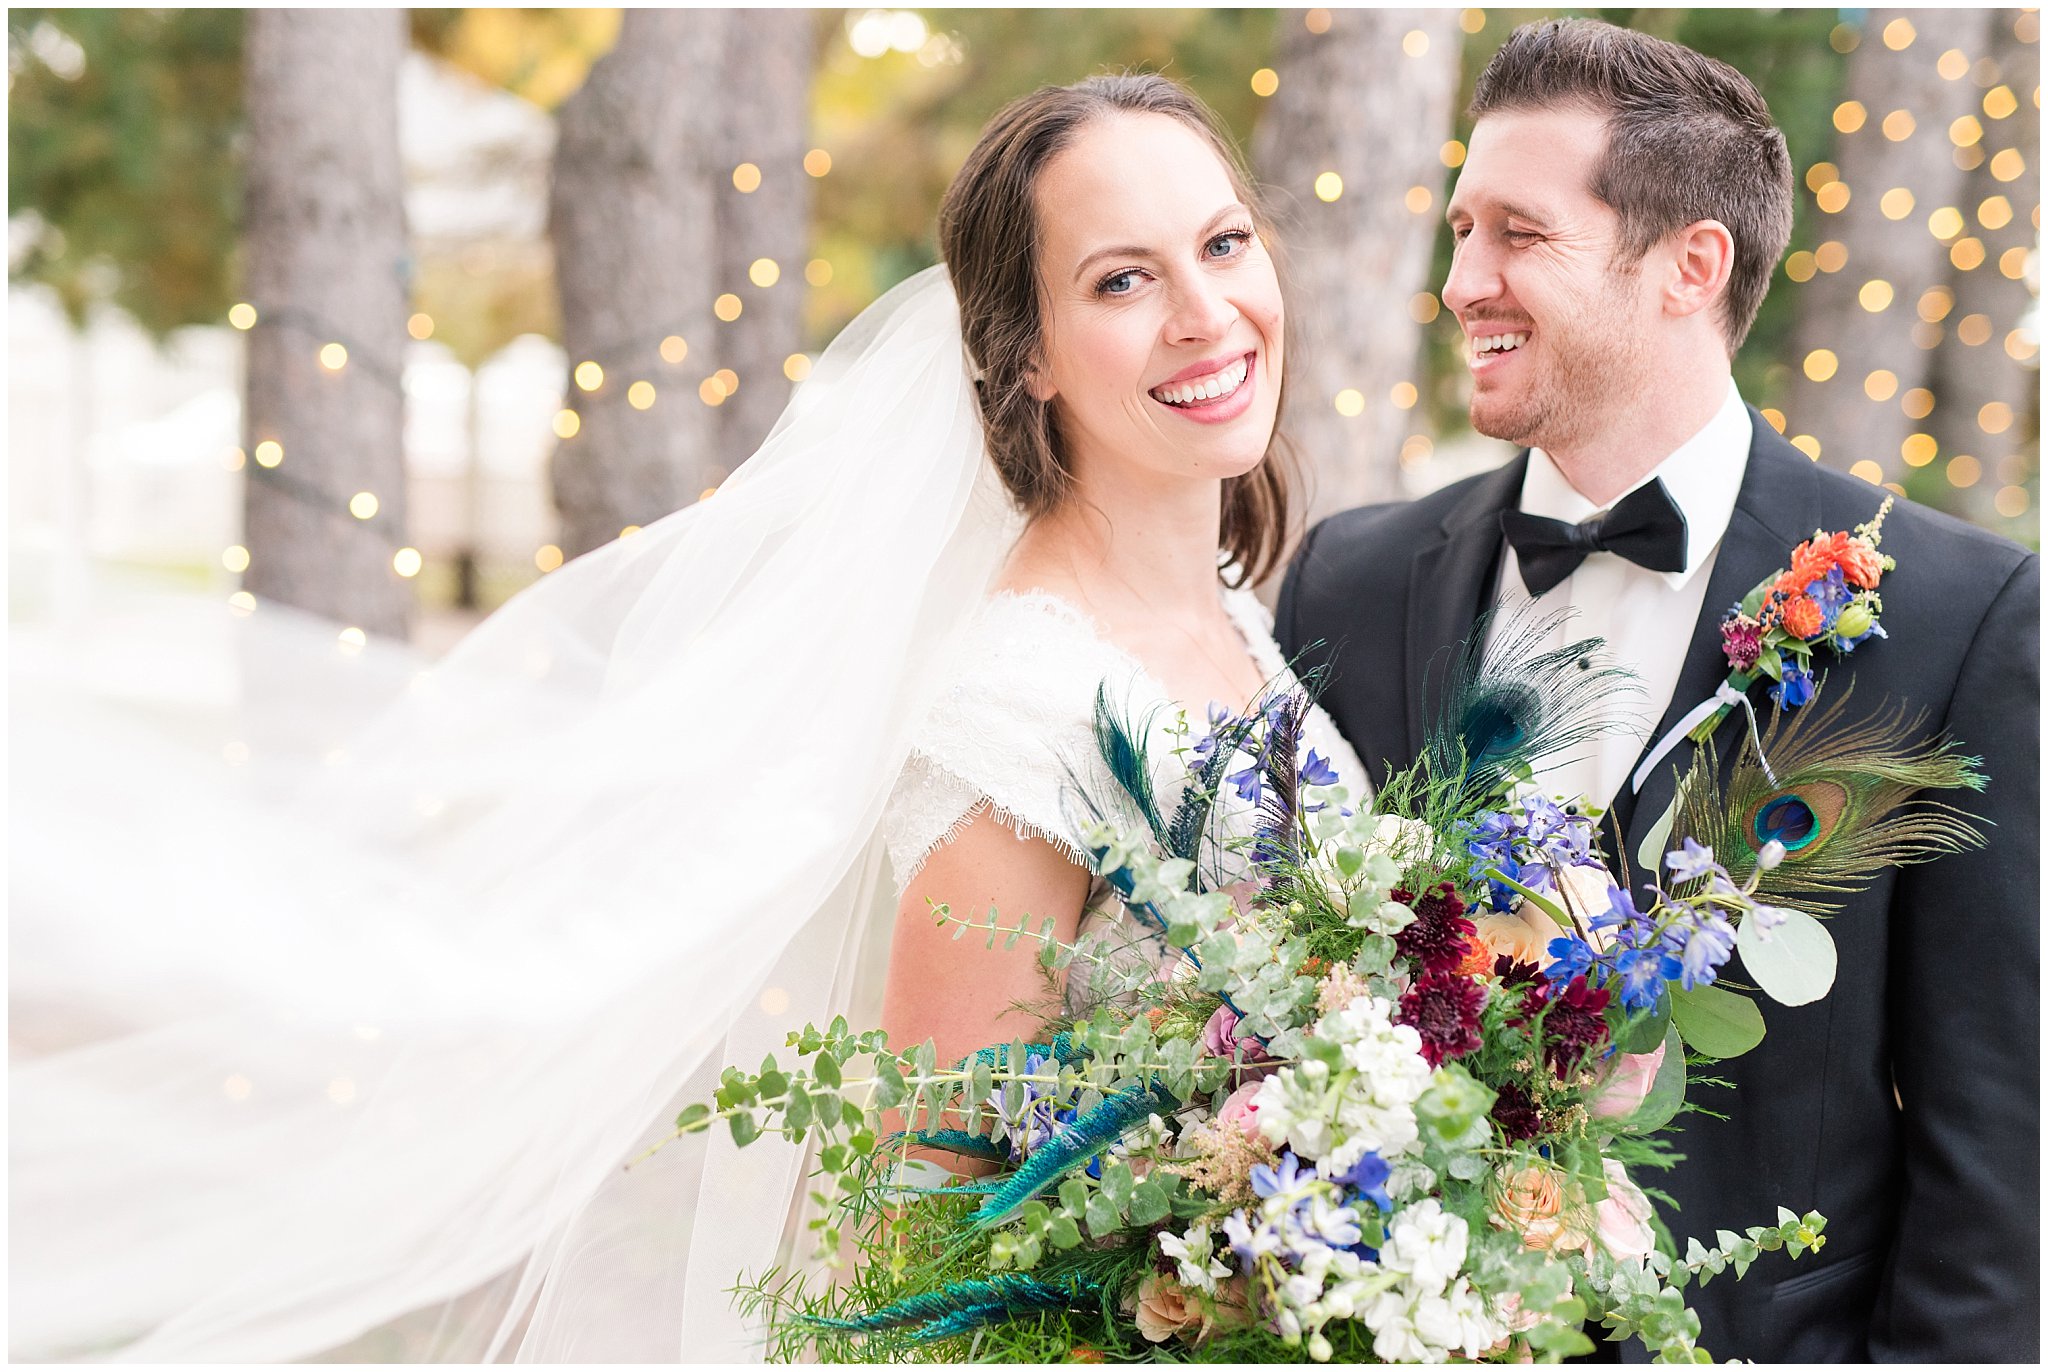 Bride and groom with black tie wedding at Oak Hills Reception and Event Center | Top Utah Wedding and Couples Photos 2019 | Jessie and Dallin Photography